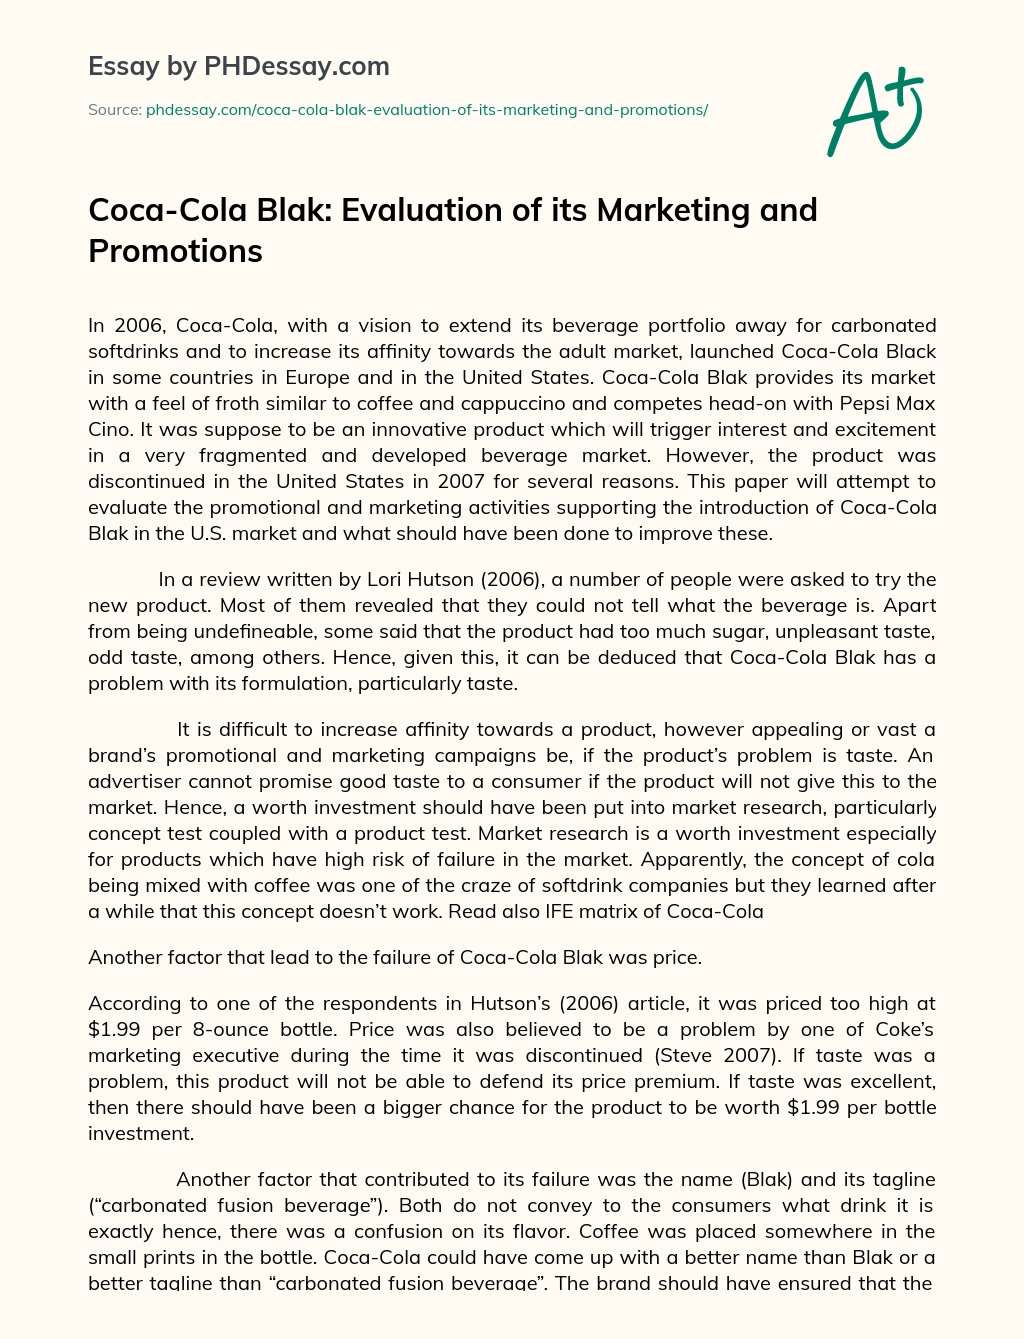 Coca-Cola Blak: Evaluation of its Marketing and Promotions essay